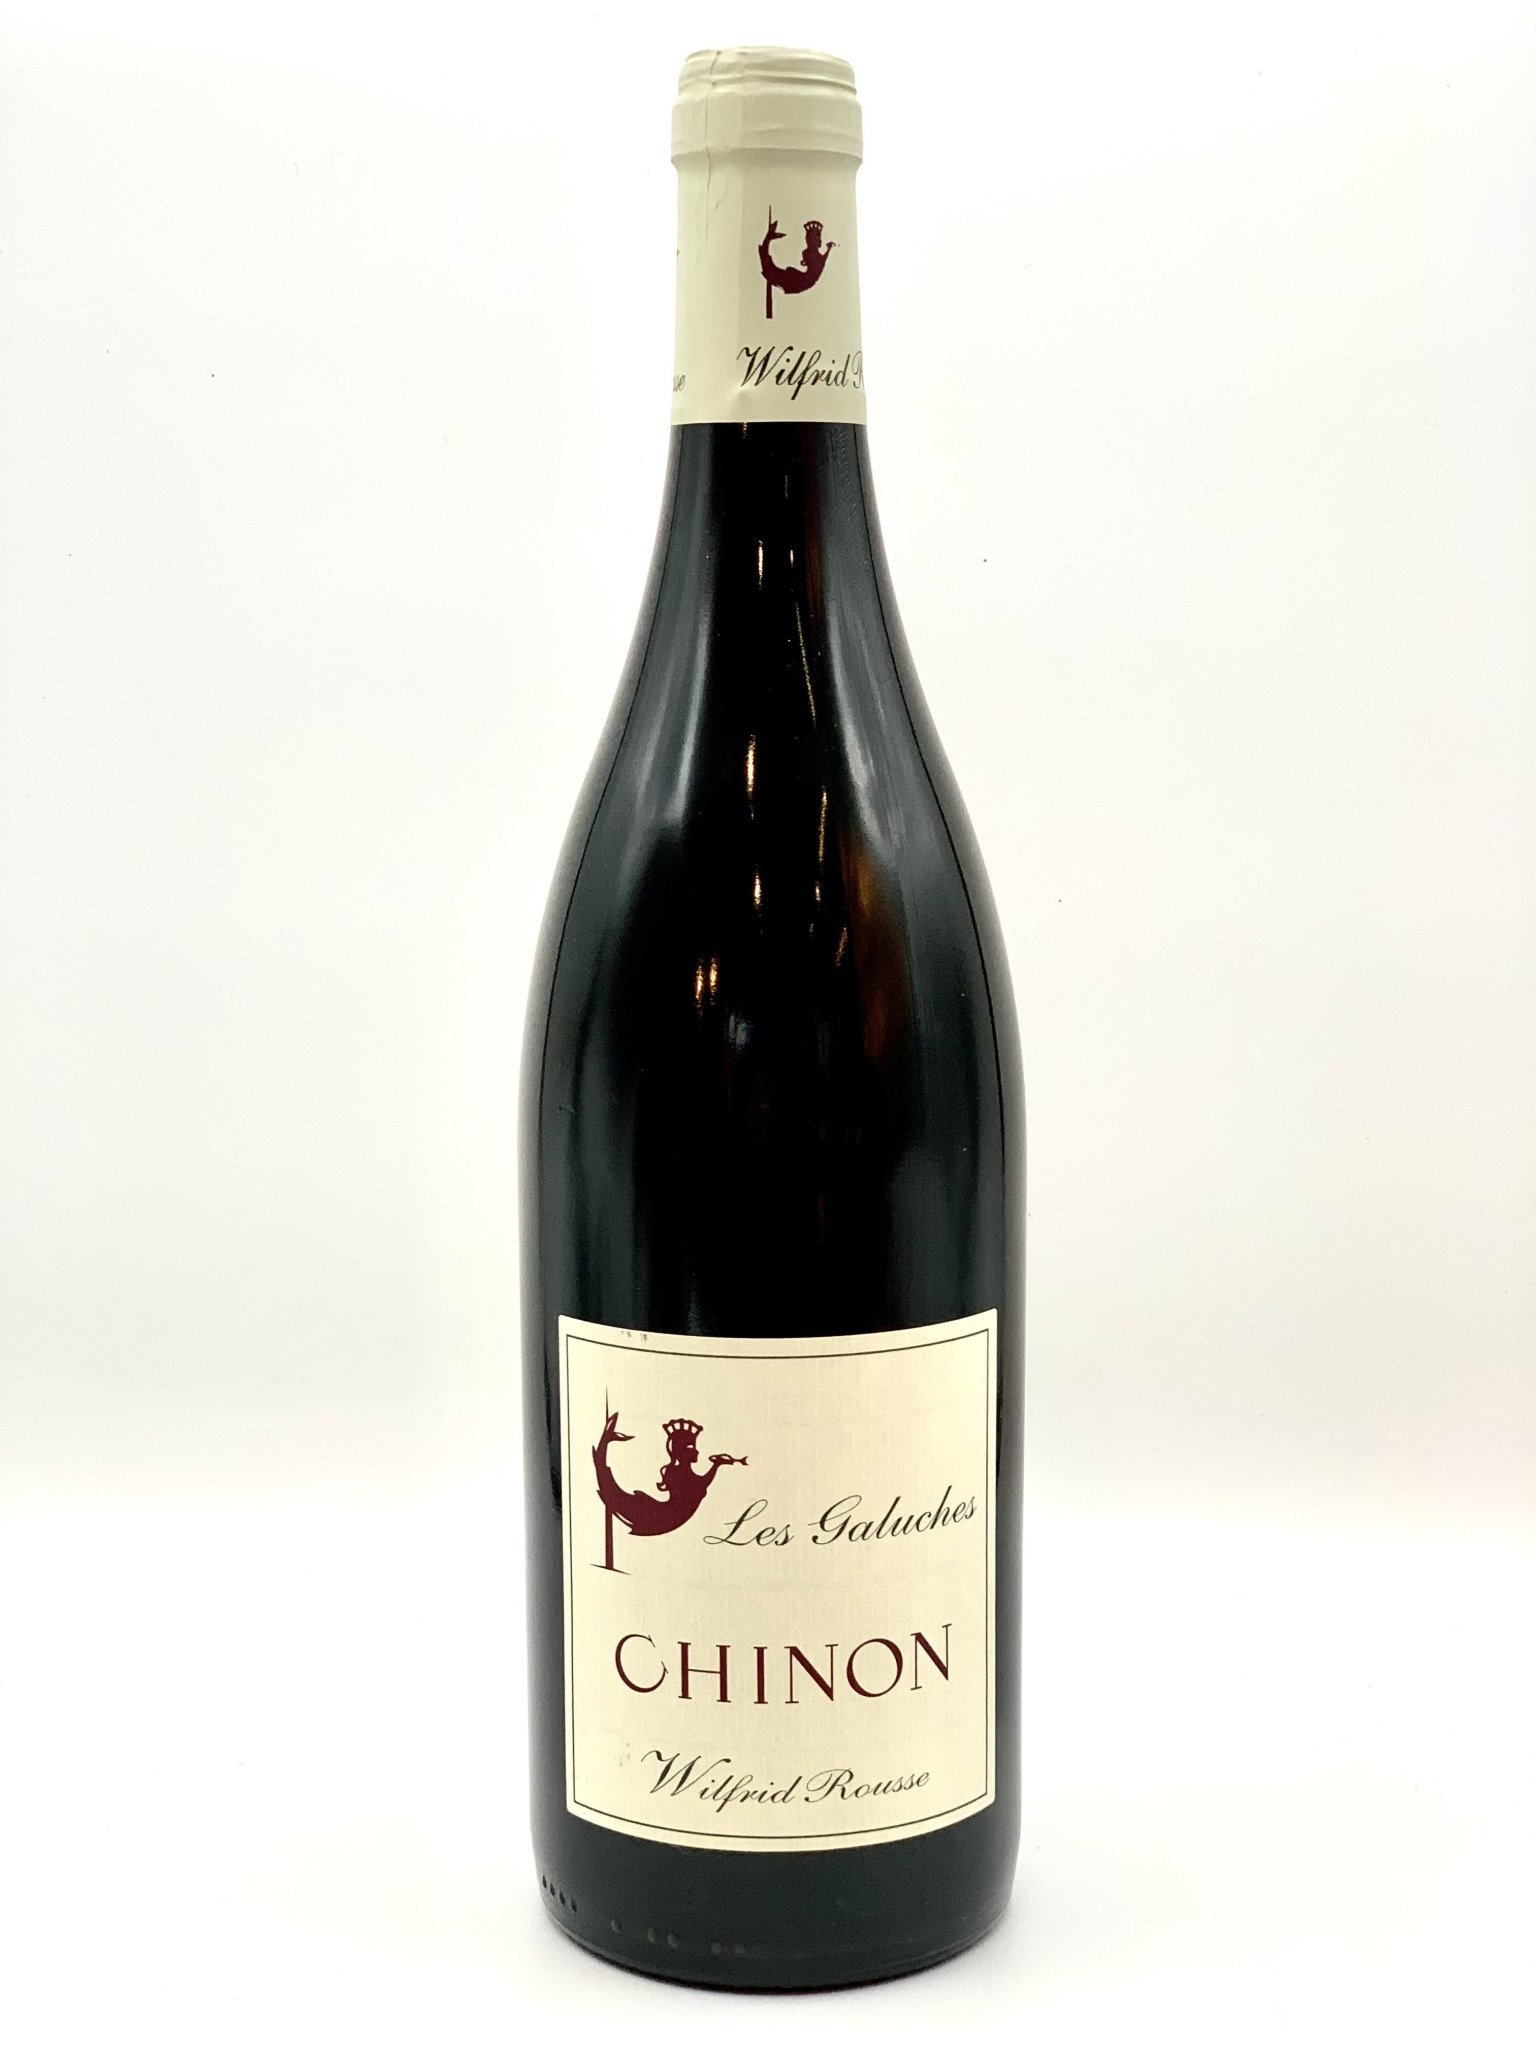 Chinon "Les Galuches" 2020/21 Domaine Wilfrid Rousse 750ml